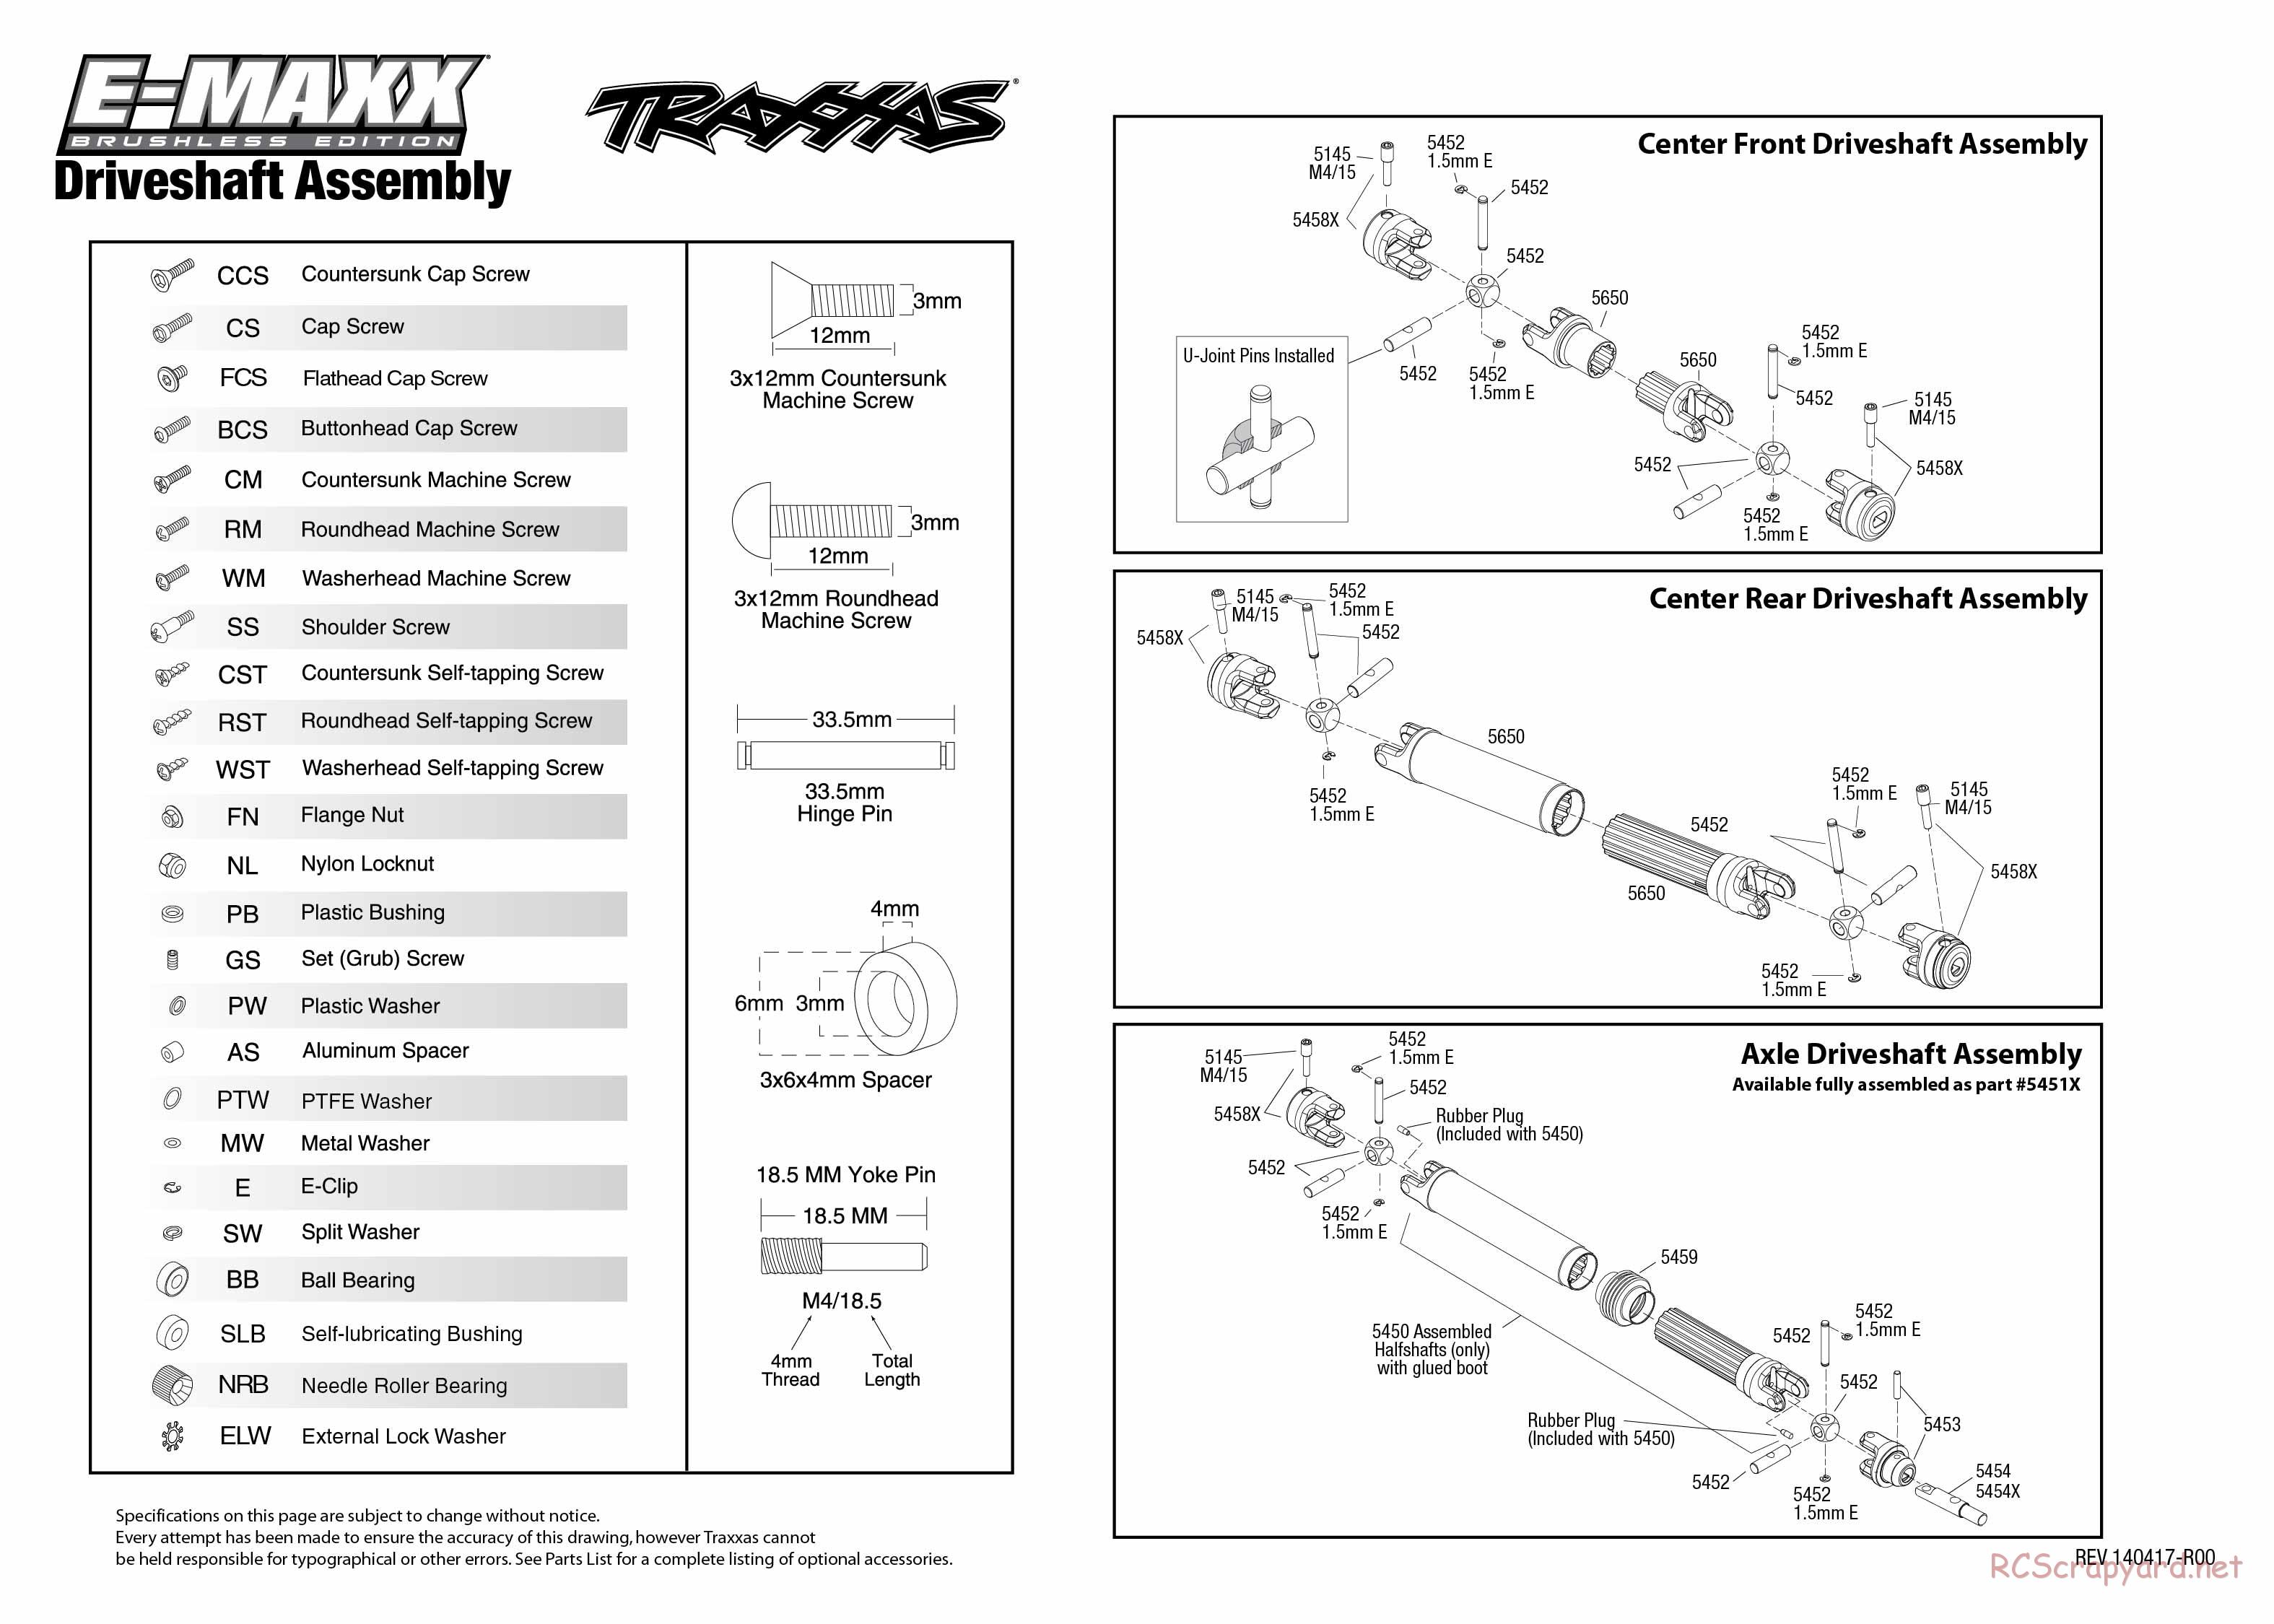 Traxxas - E-Maxx Brushless (2014) - Exploded Views - Page 5